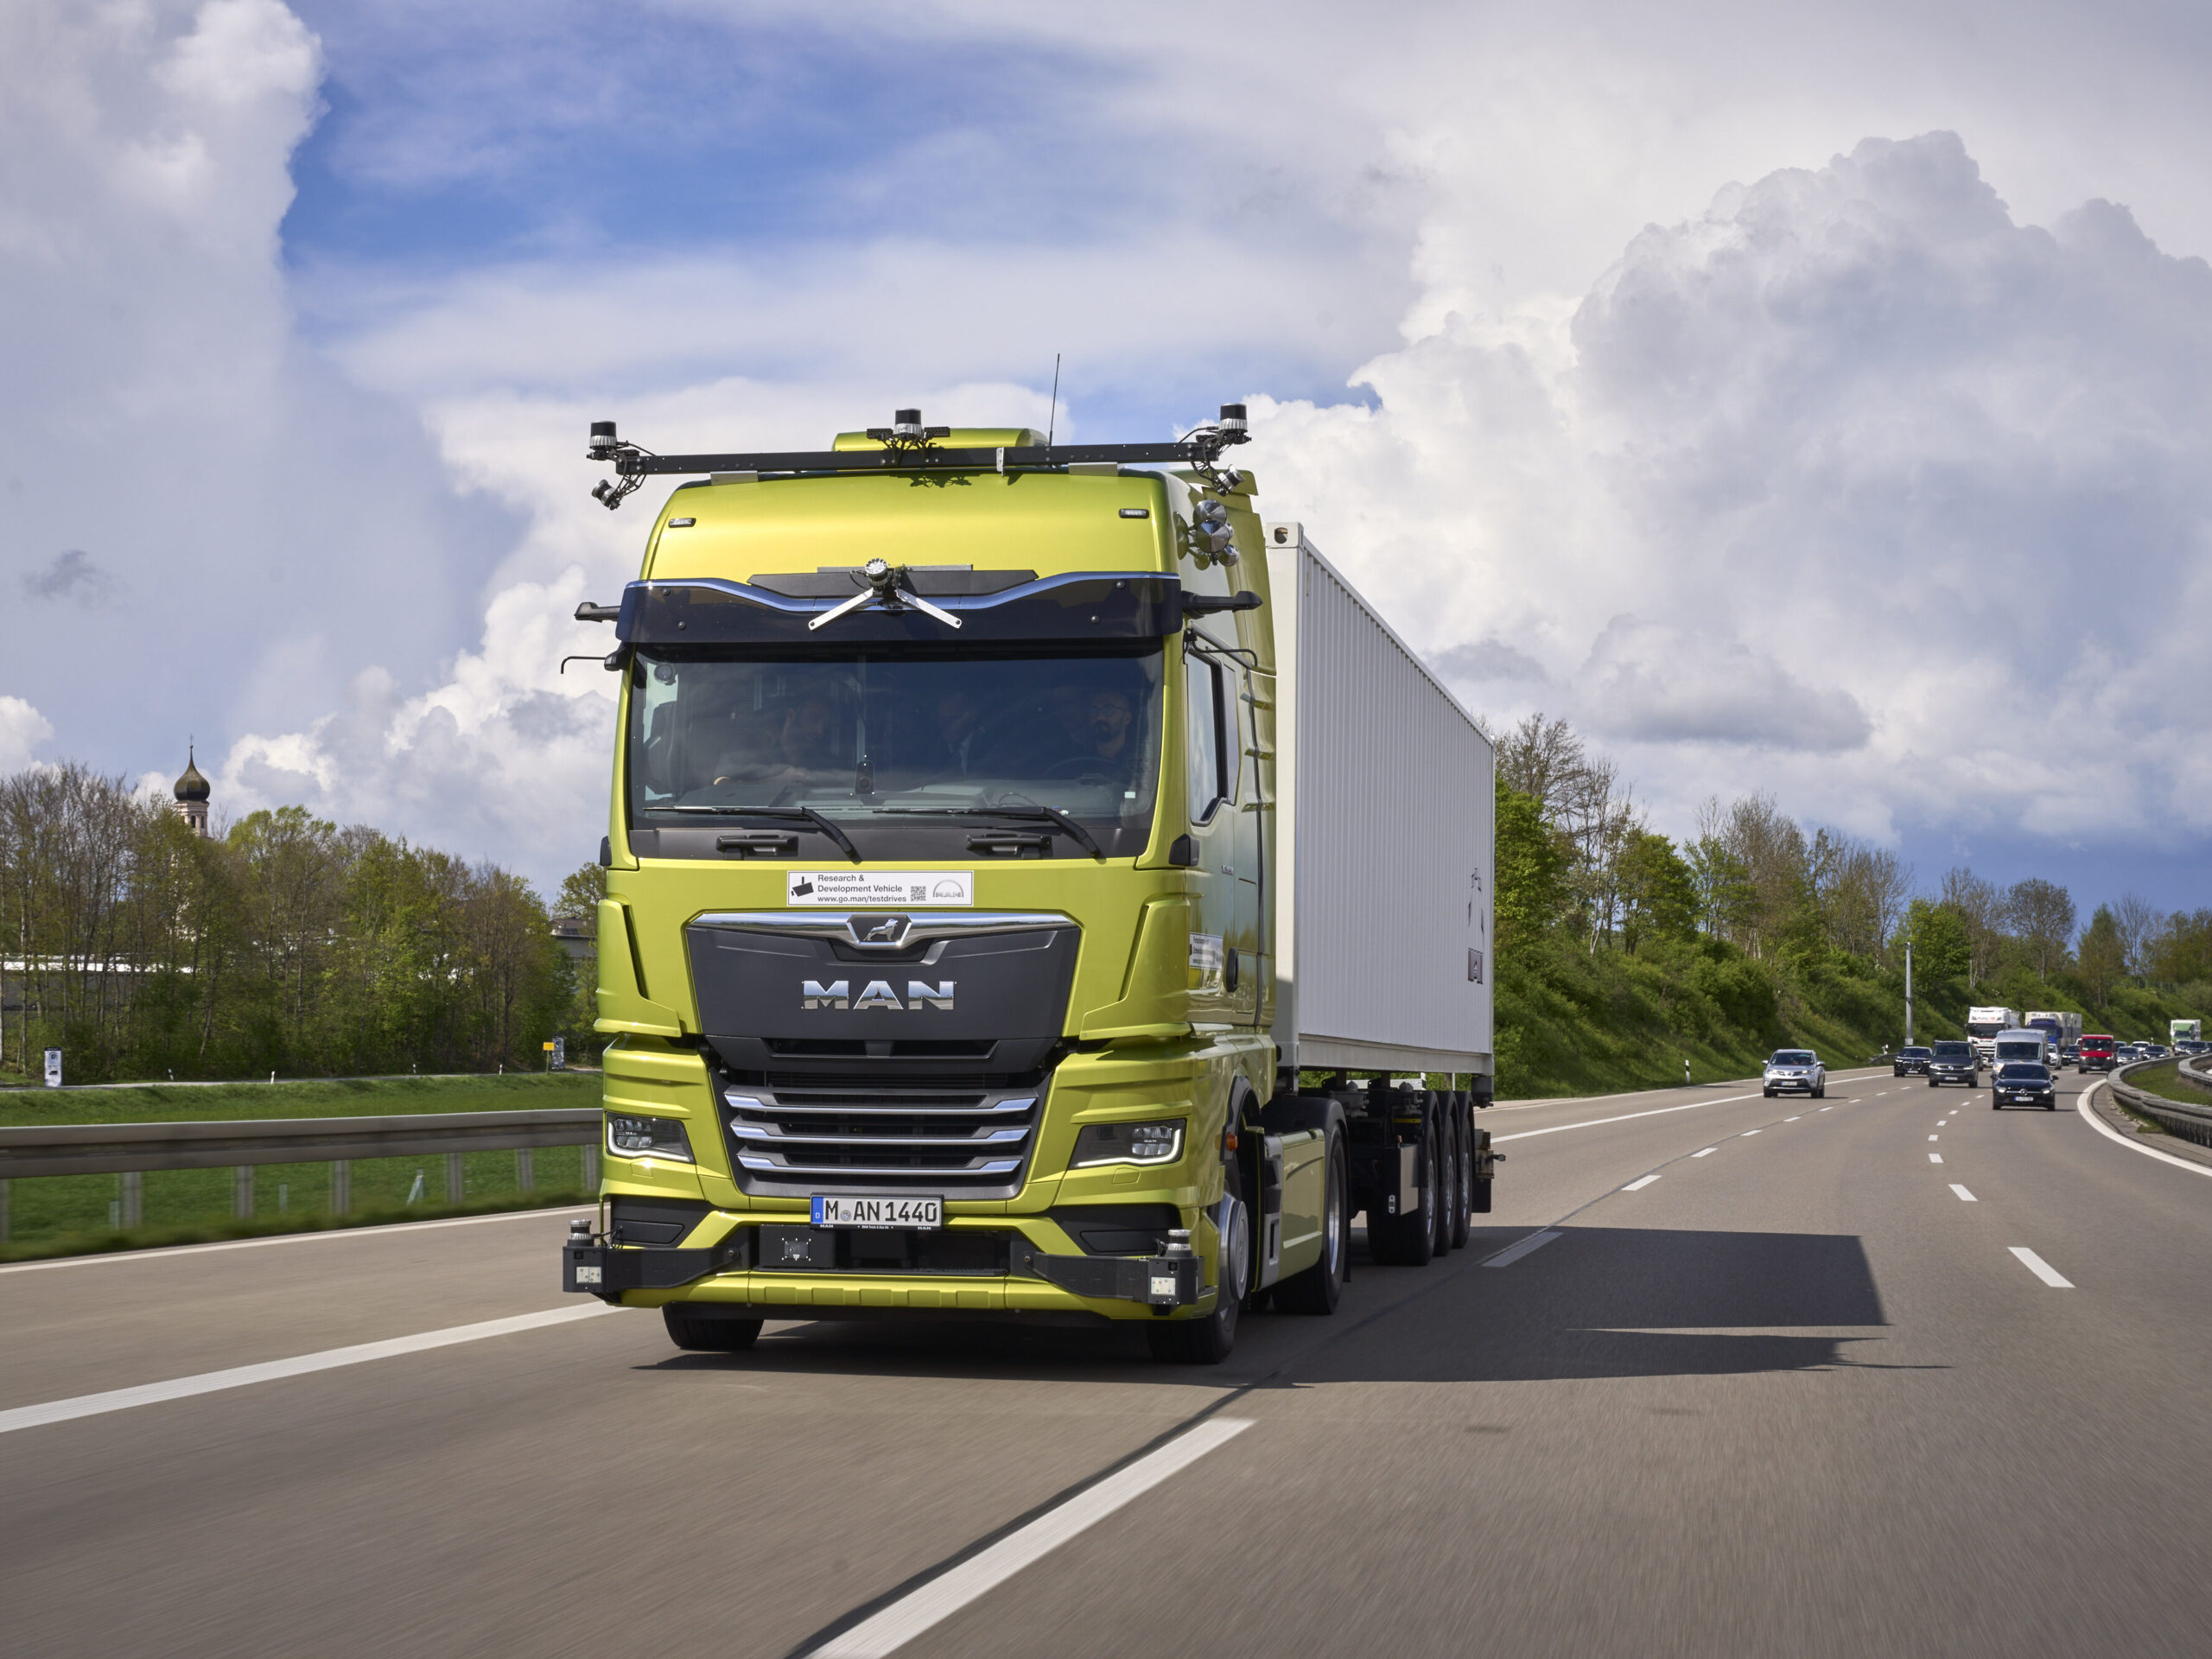 MAN Autonomous Truck Completes Motorway Test Drive in Germany